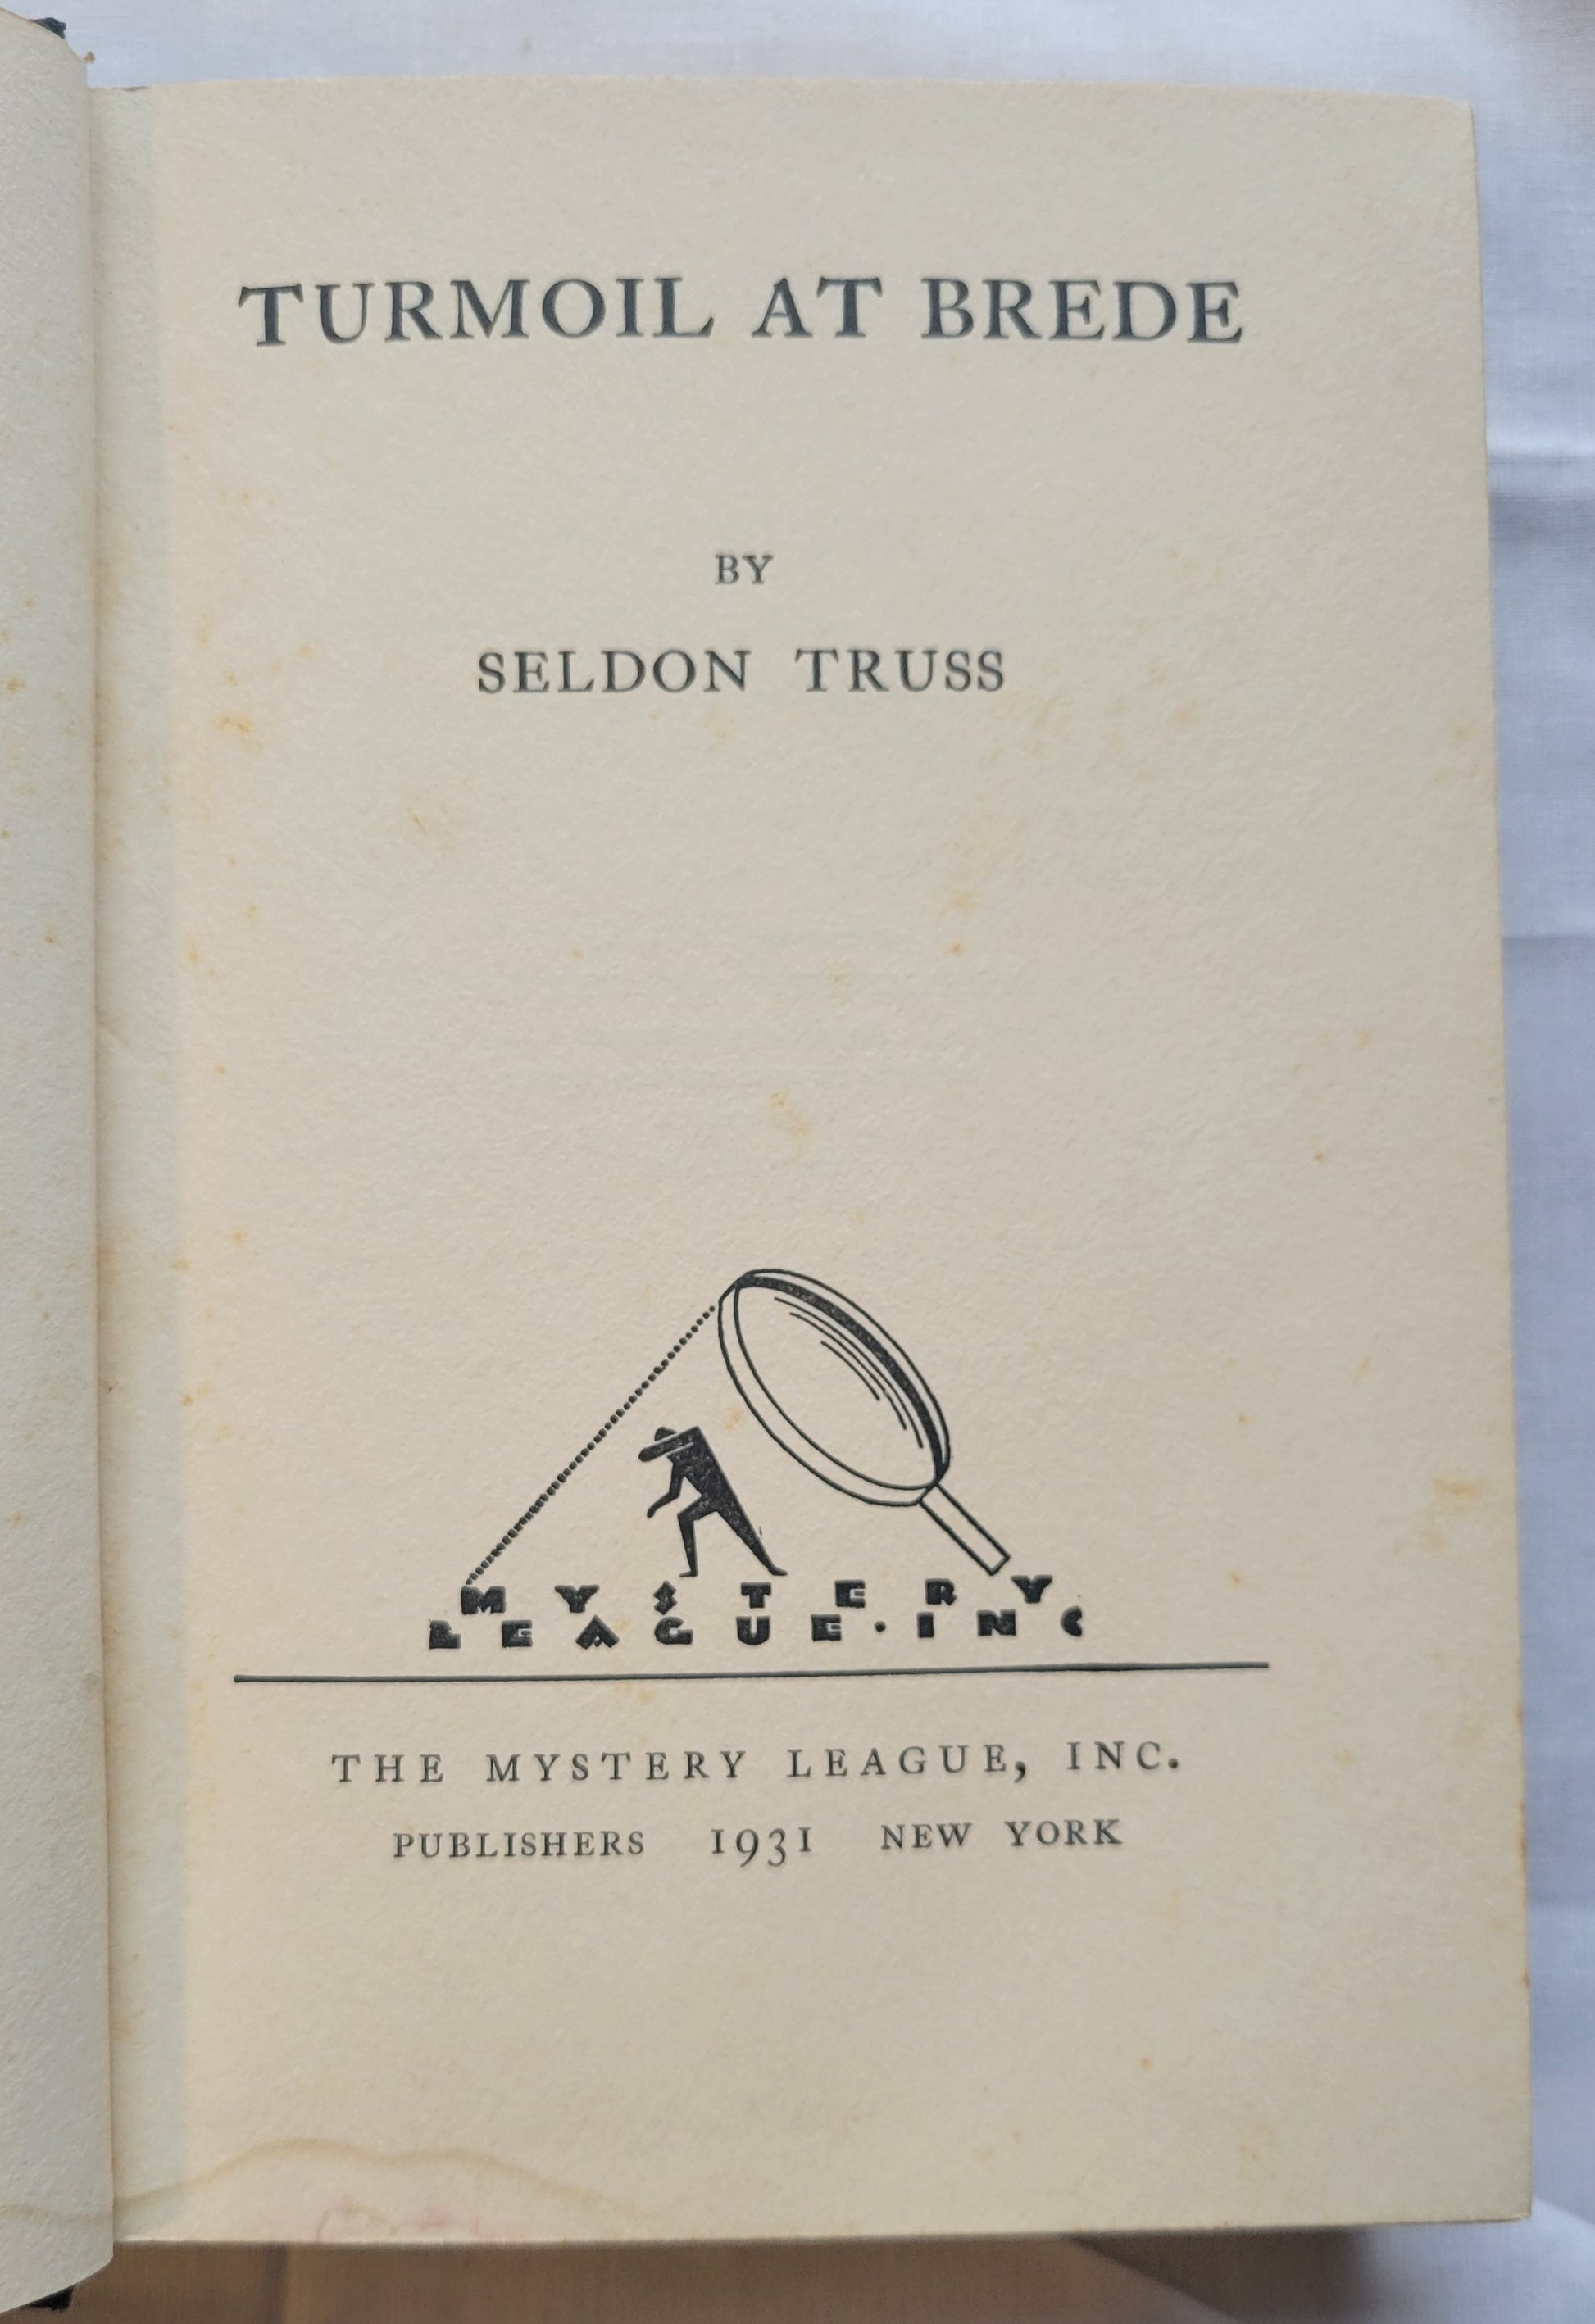 Antique book for sale “Turmoil at Brede, First Edition” by Seldon Truss, published by The Mystery League in 1931. Title page.